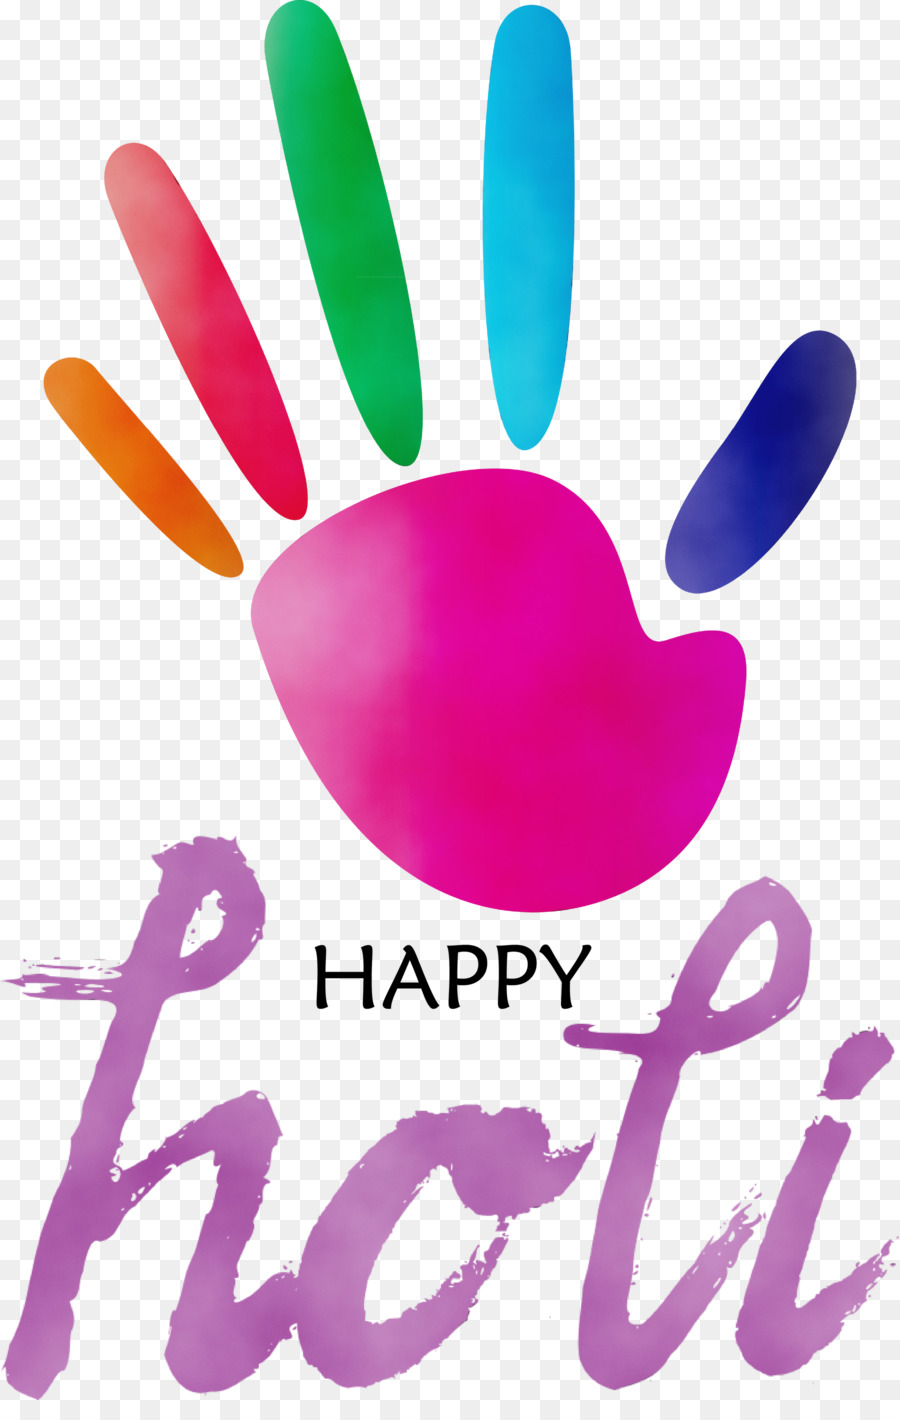 Free Vector | Watercolor splash with gulal color plates for happy holi  festival